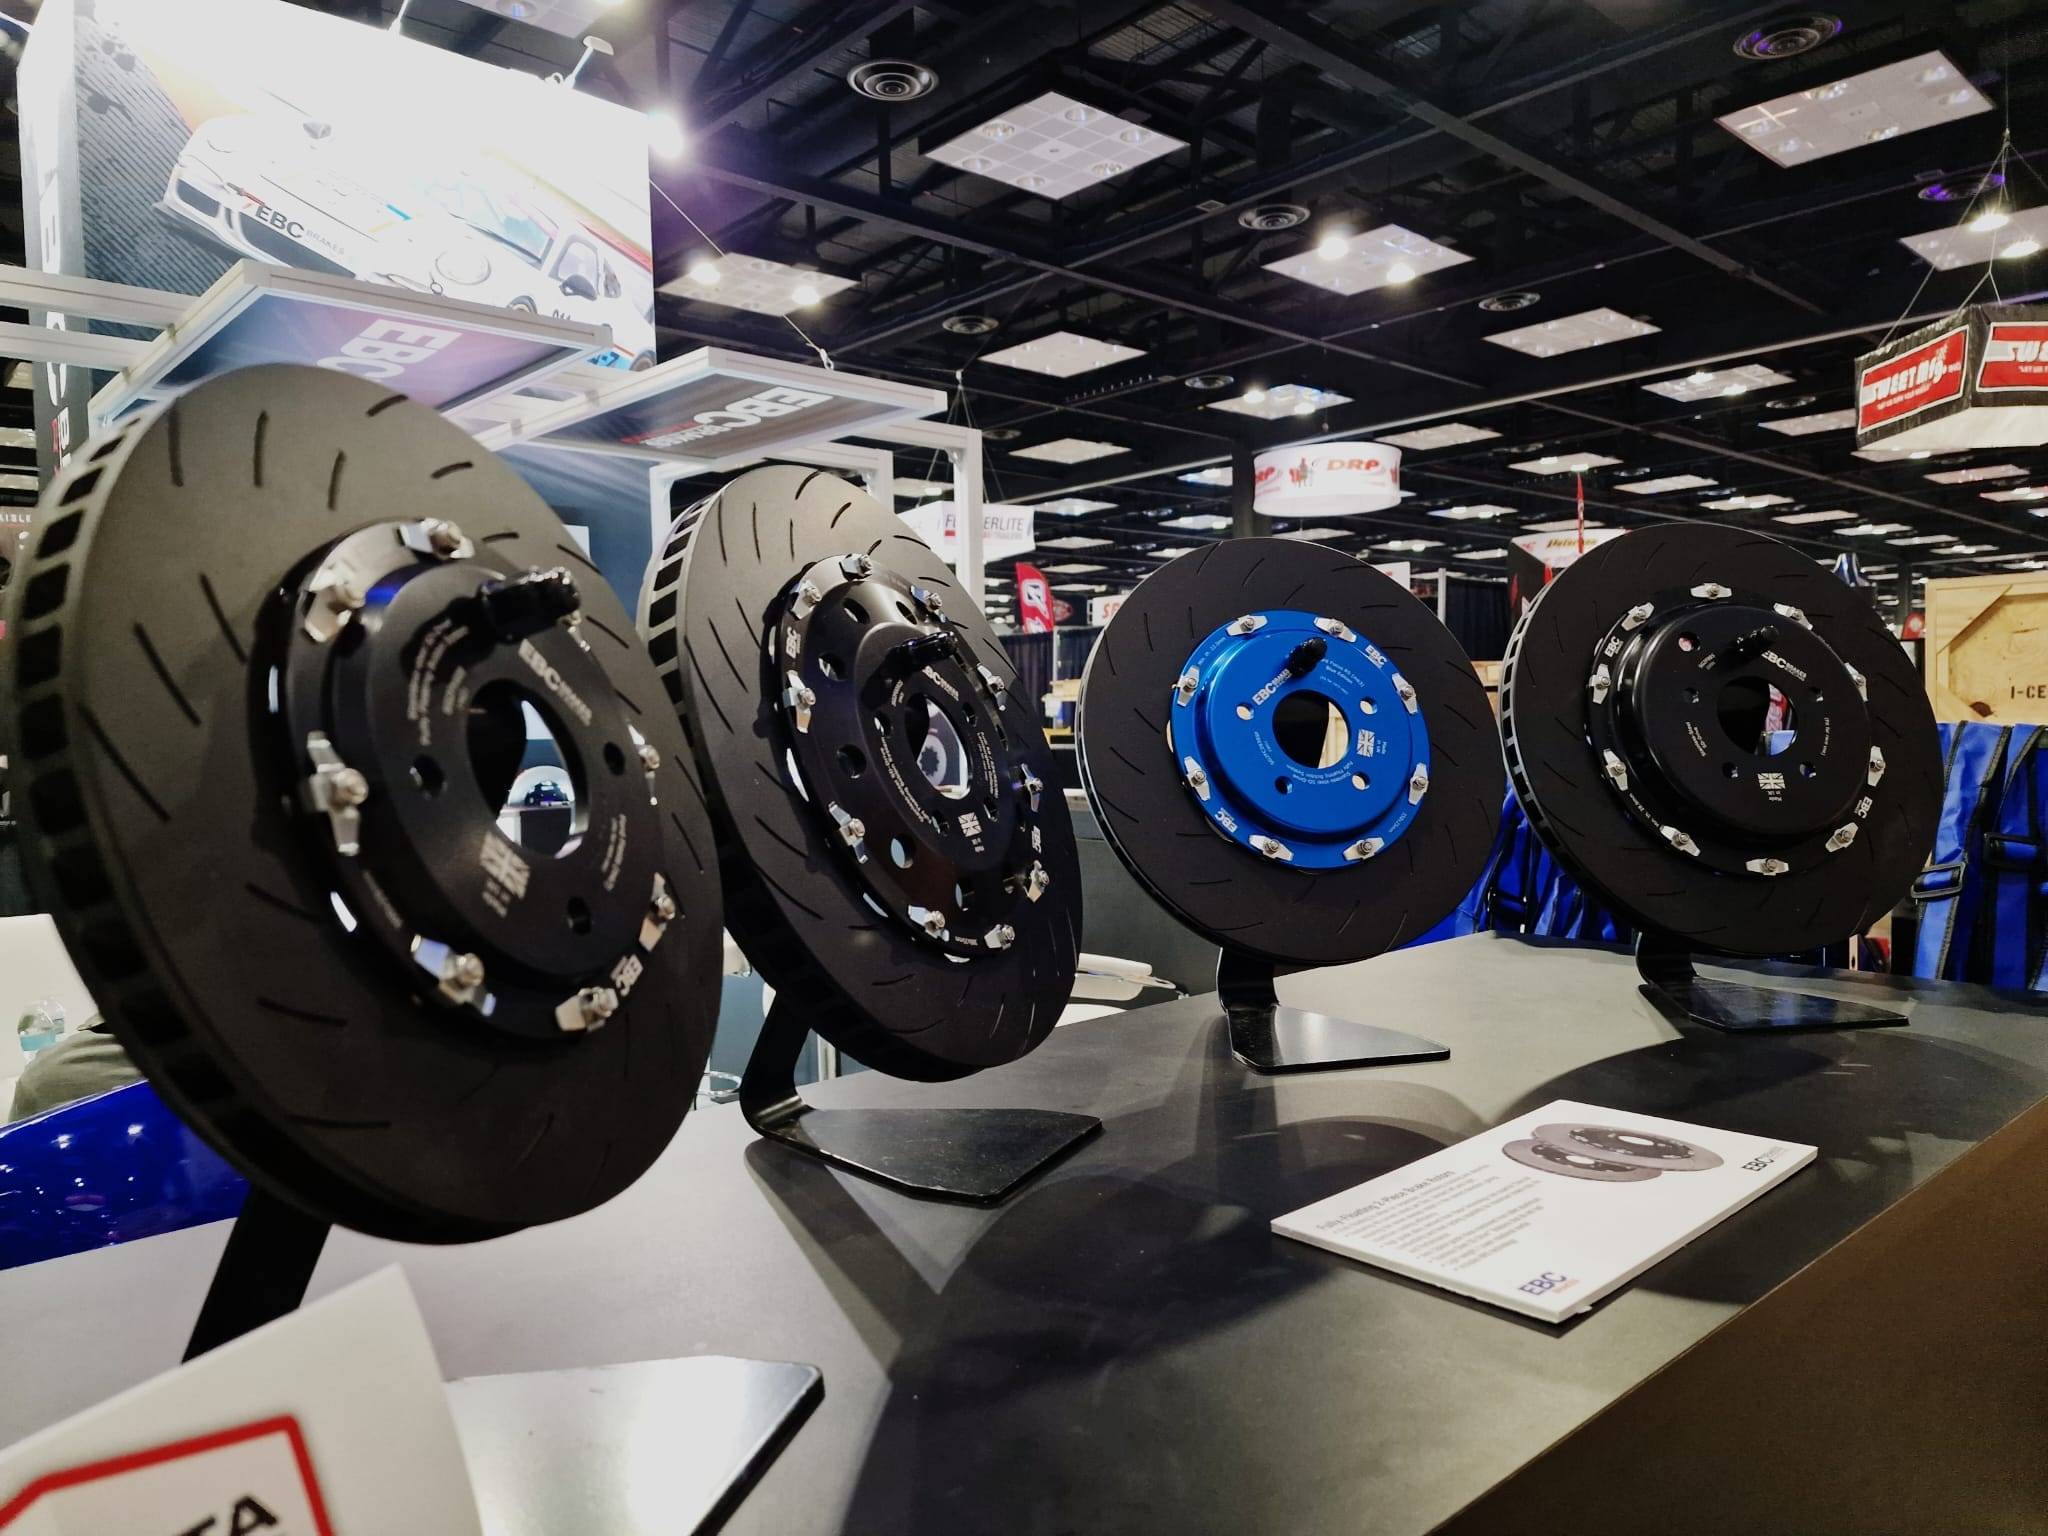 EBC Brakes Set to Attend Performance Racing Industry 2022